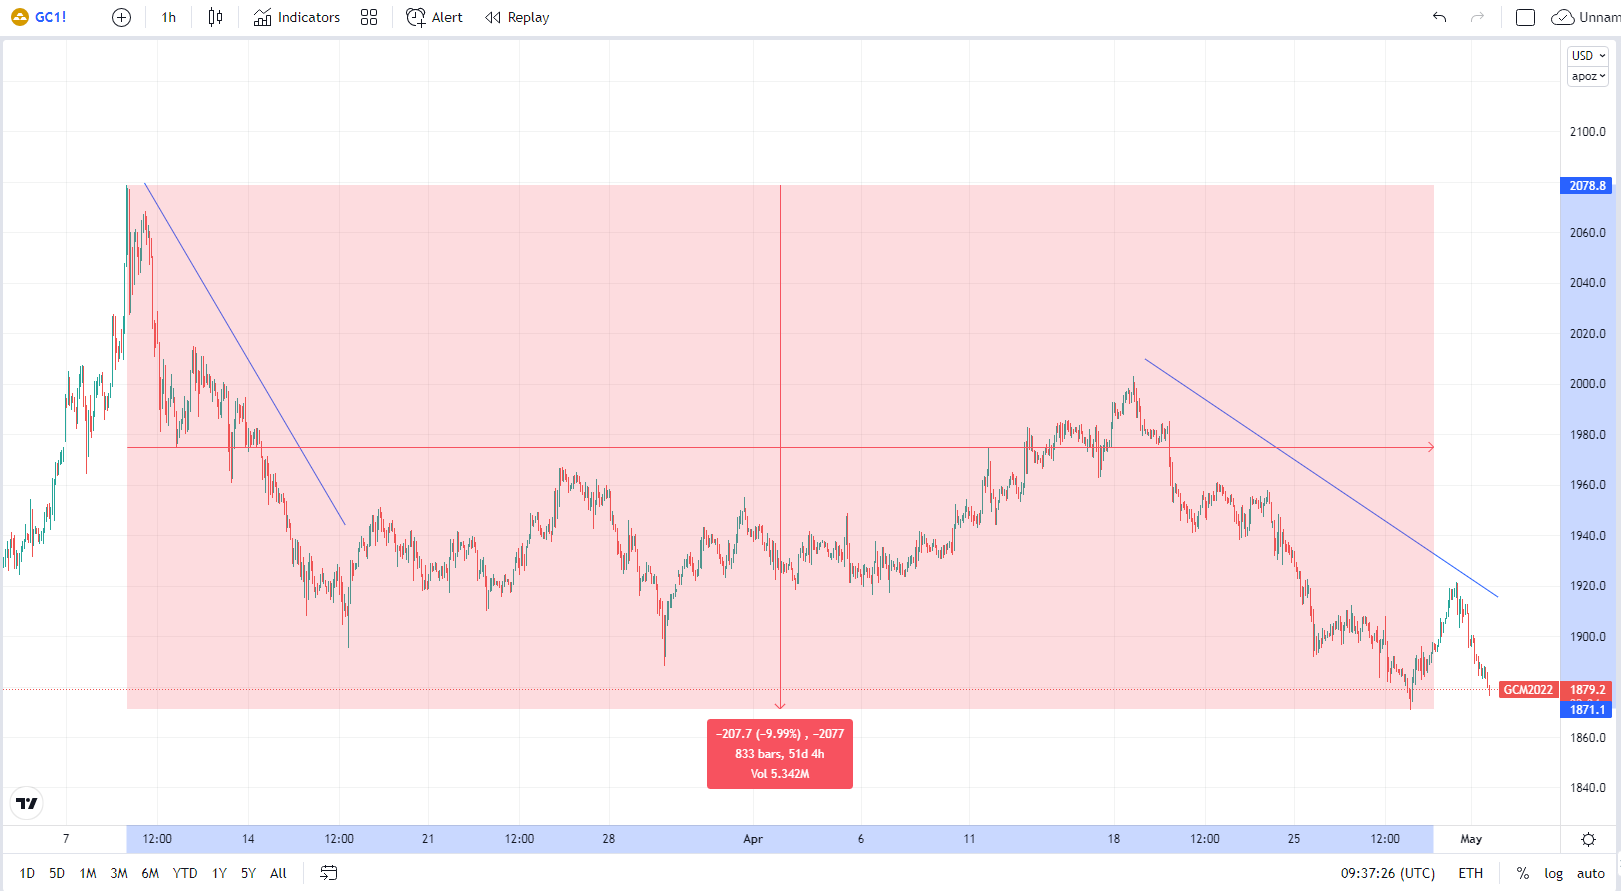 1 hour chart of GC, Price fall after Fed´s decision. Source: tradingview.com